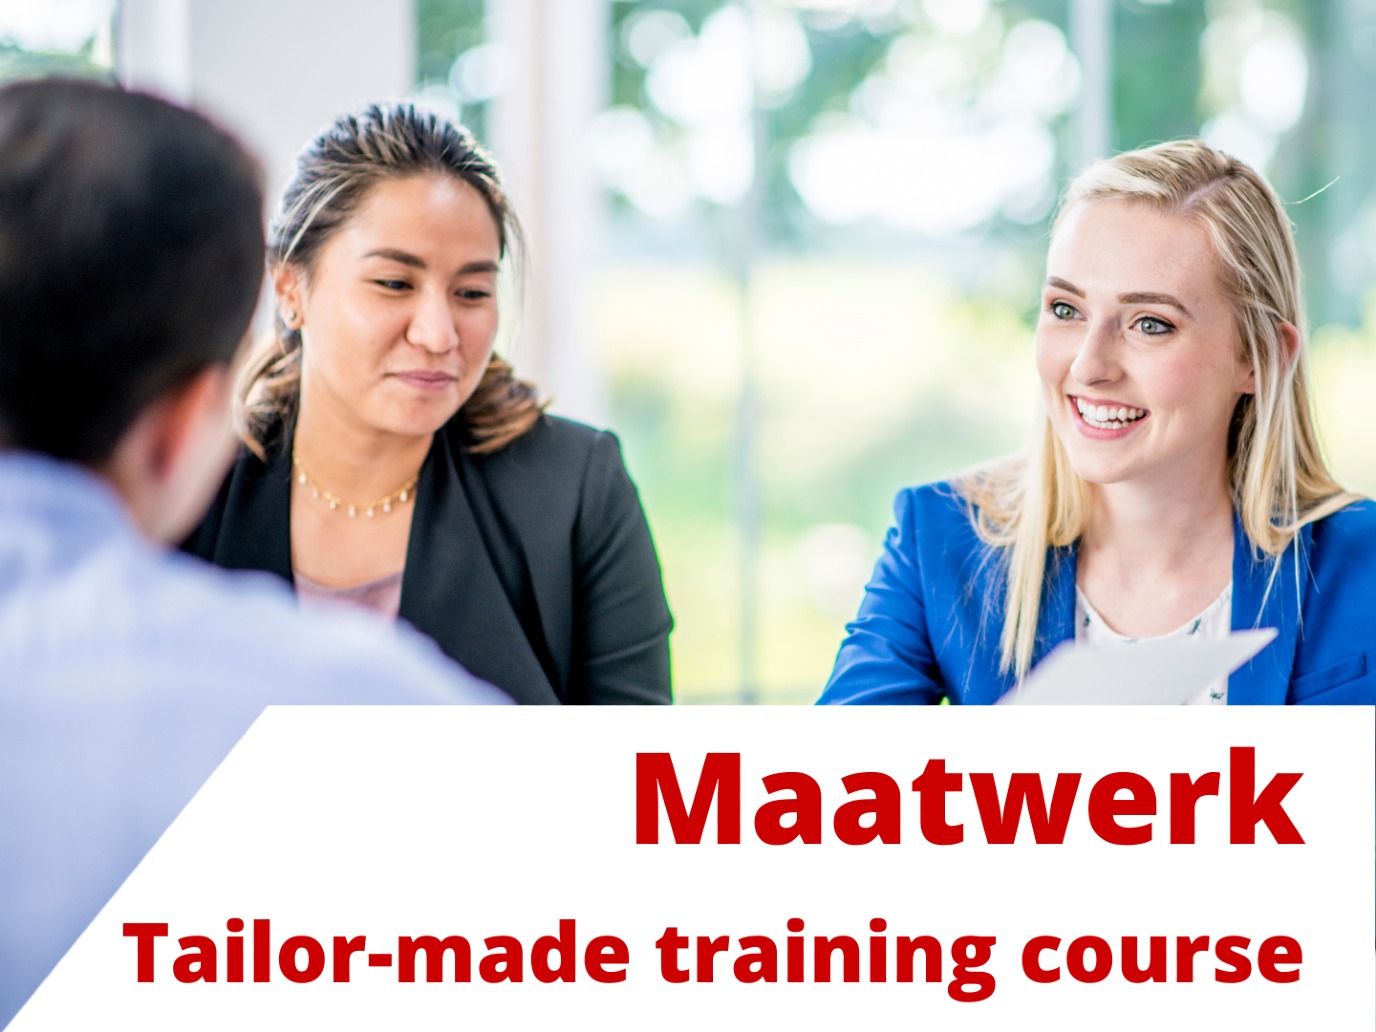 Tailor-made training courses